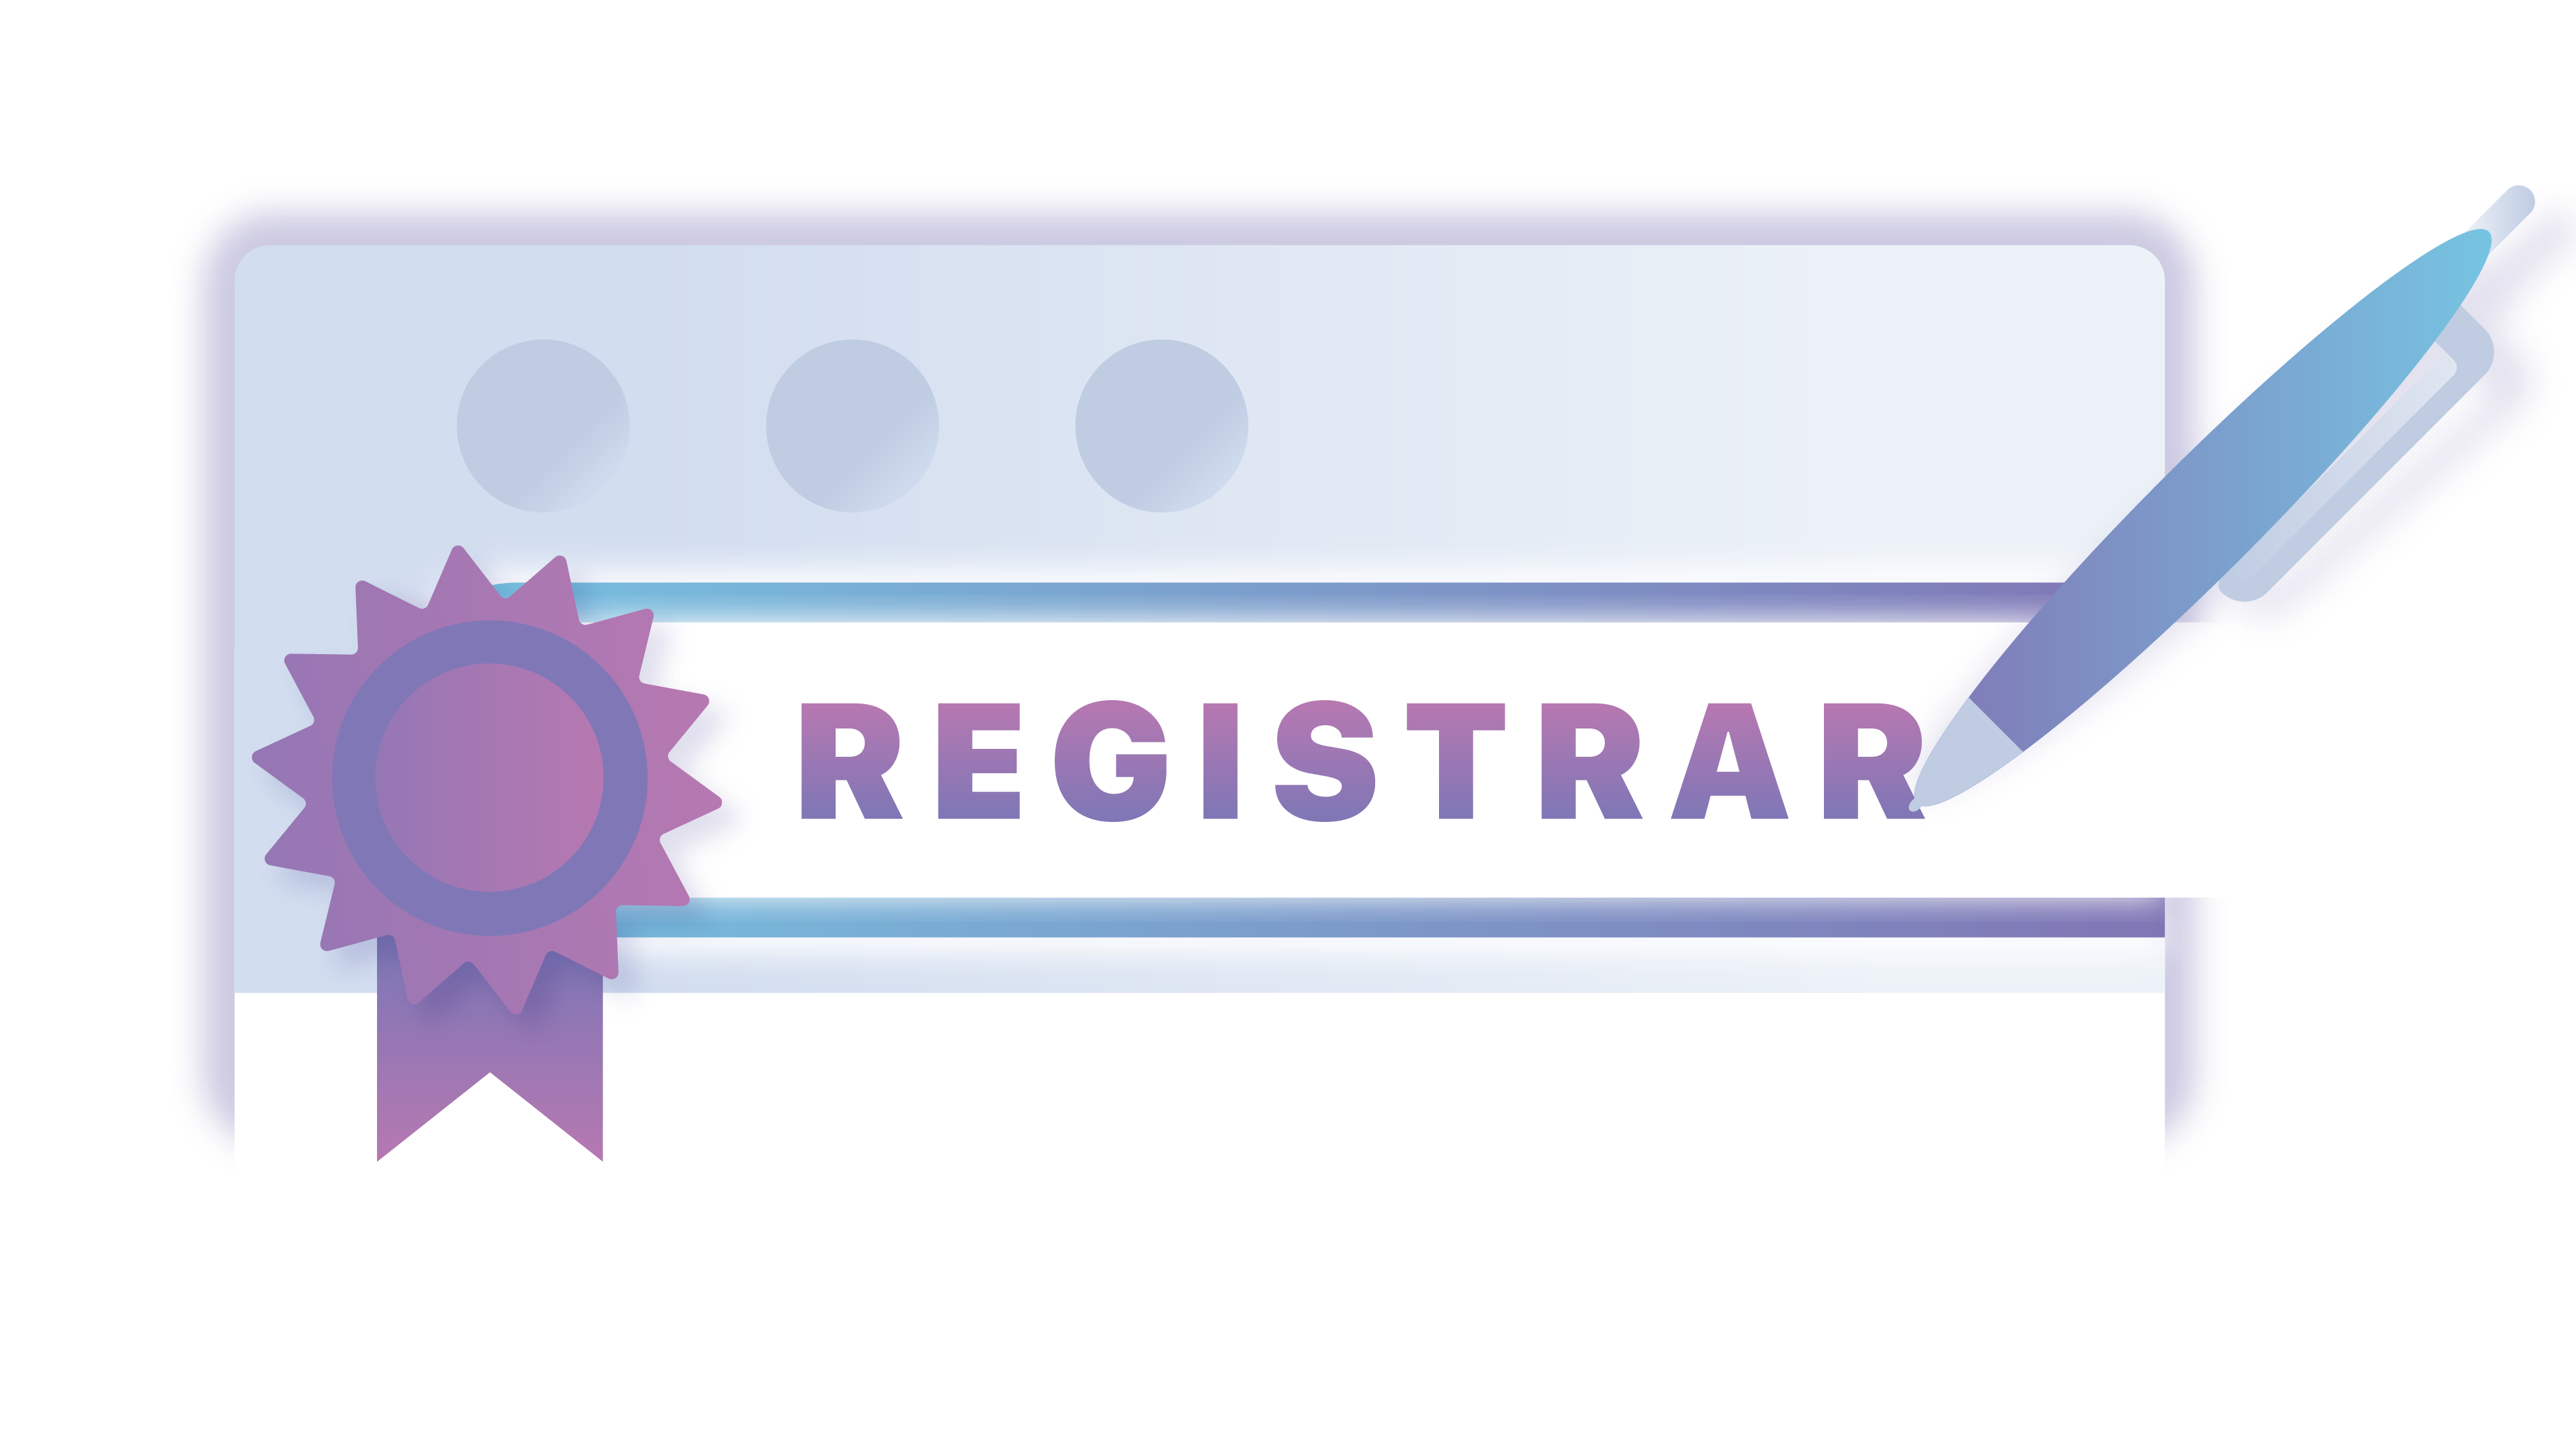 One-Click DNSSEC with Cloudflare Registrar